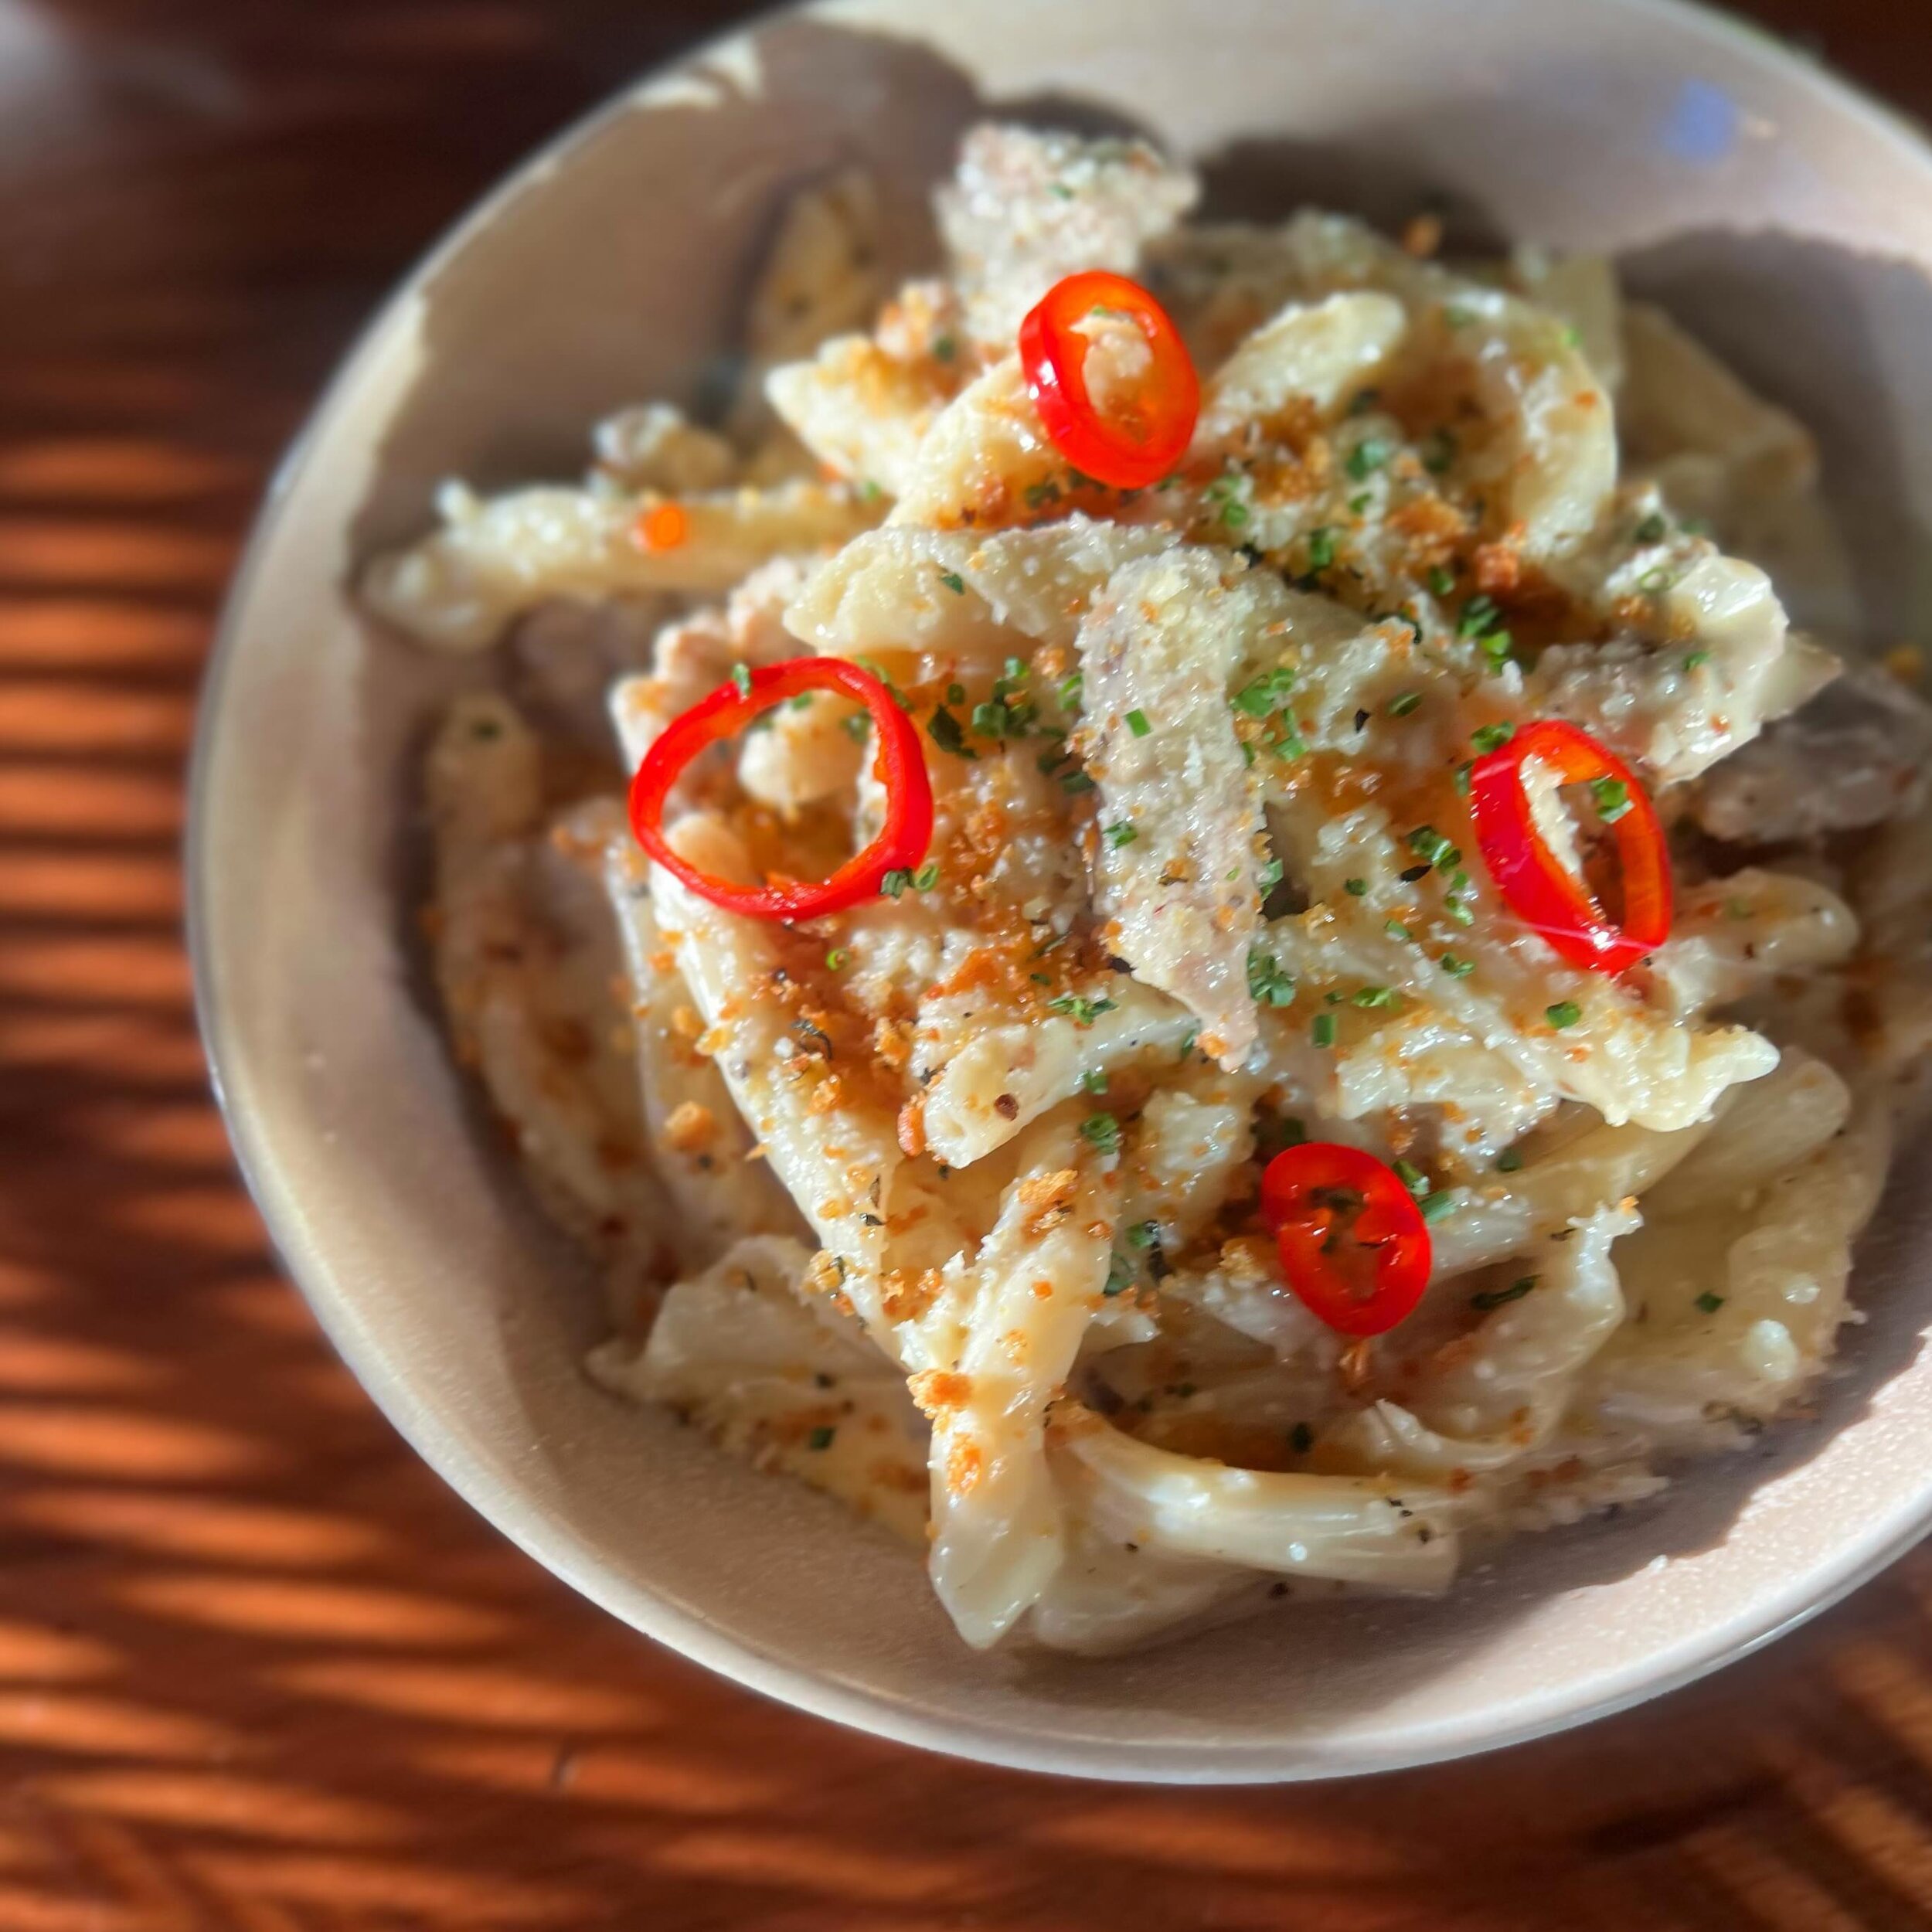 Pasta alla Norcina - one of our newest pastas is a fan favorite right out of the gate. Garganelli pasta and savory fennel sausage tossed in a black truffle parmesan cream sauce, finished with herbed bread crumbs and a few pickled Fresnos for a pop of